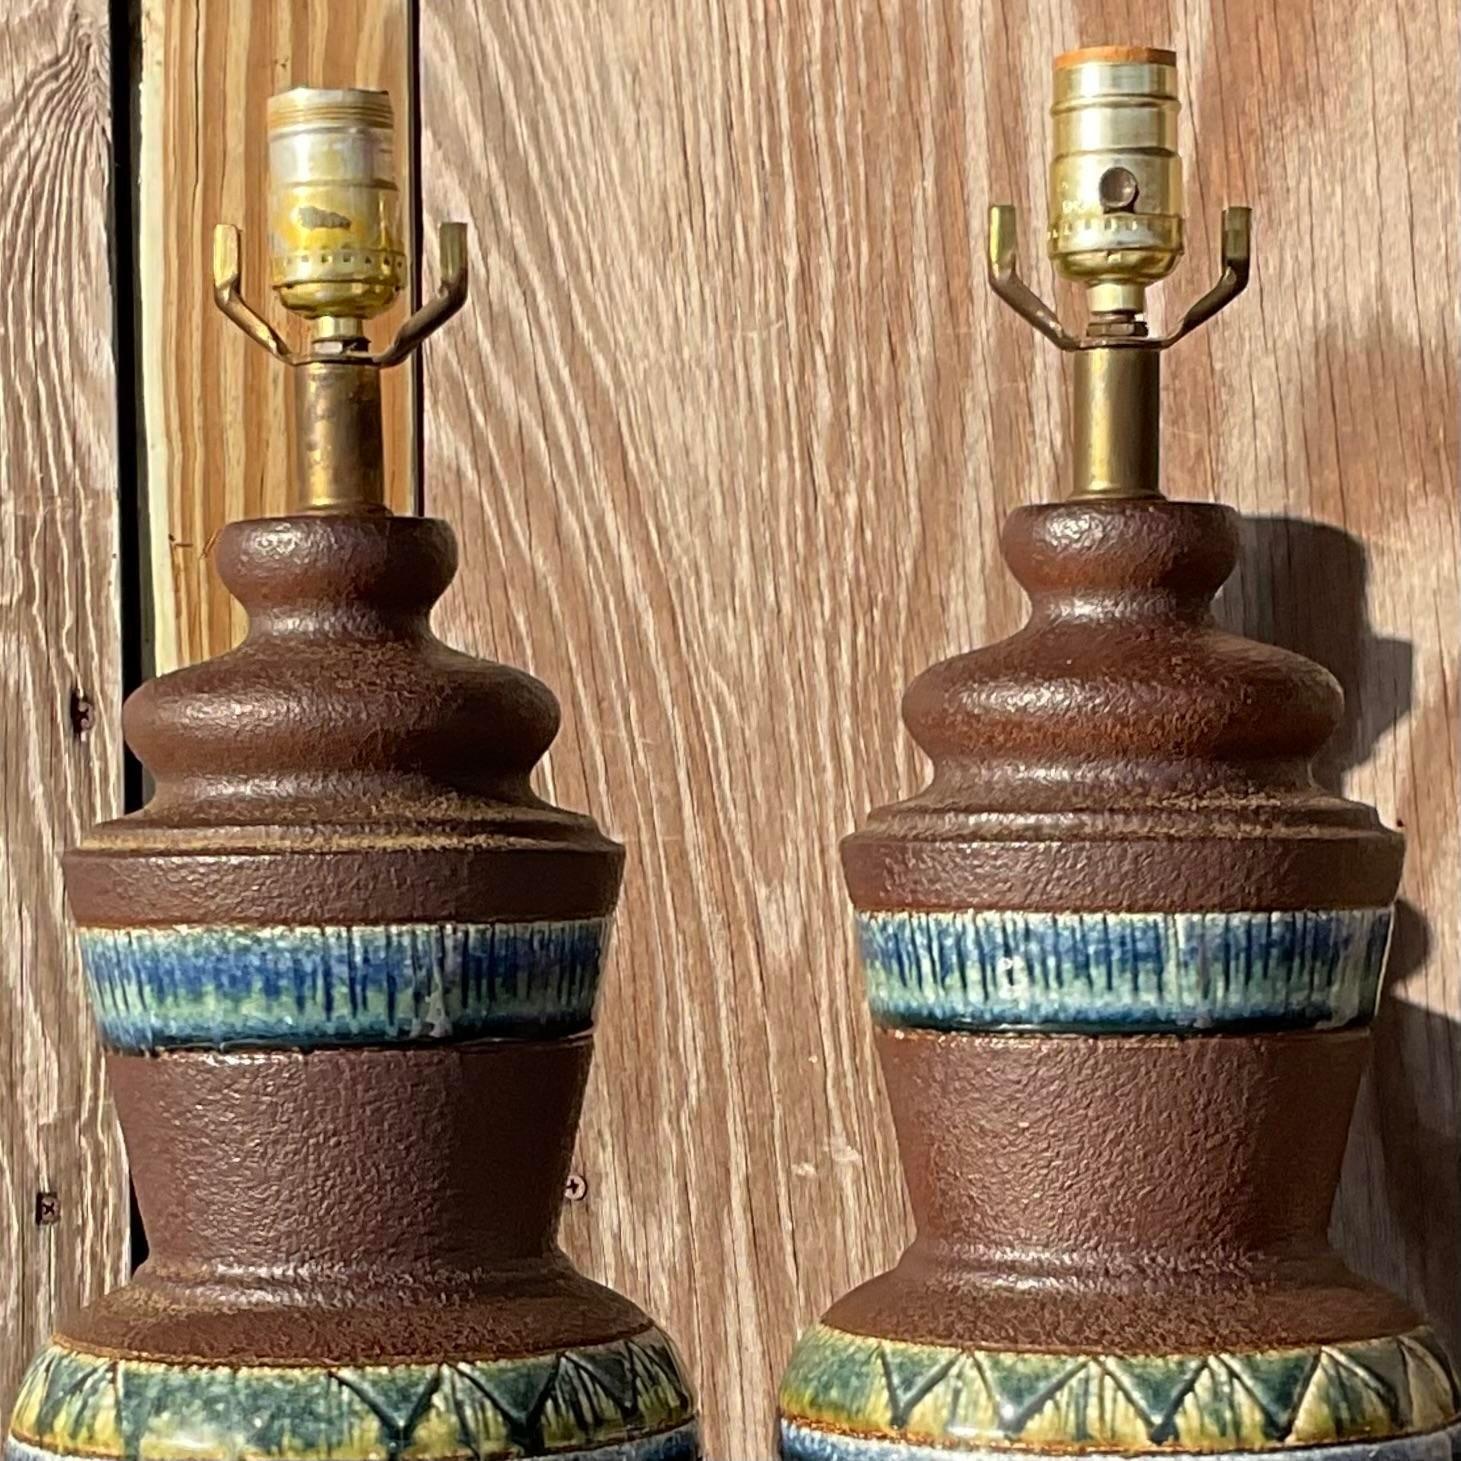 A stunning pair of vintage MCM table lamps. A chic combo of matte and gloss finishes with brilliant blue green bands. Rest of brass plinths. Acquired from a Palm Beach estate.